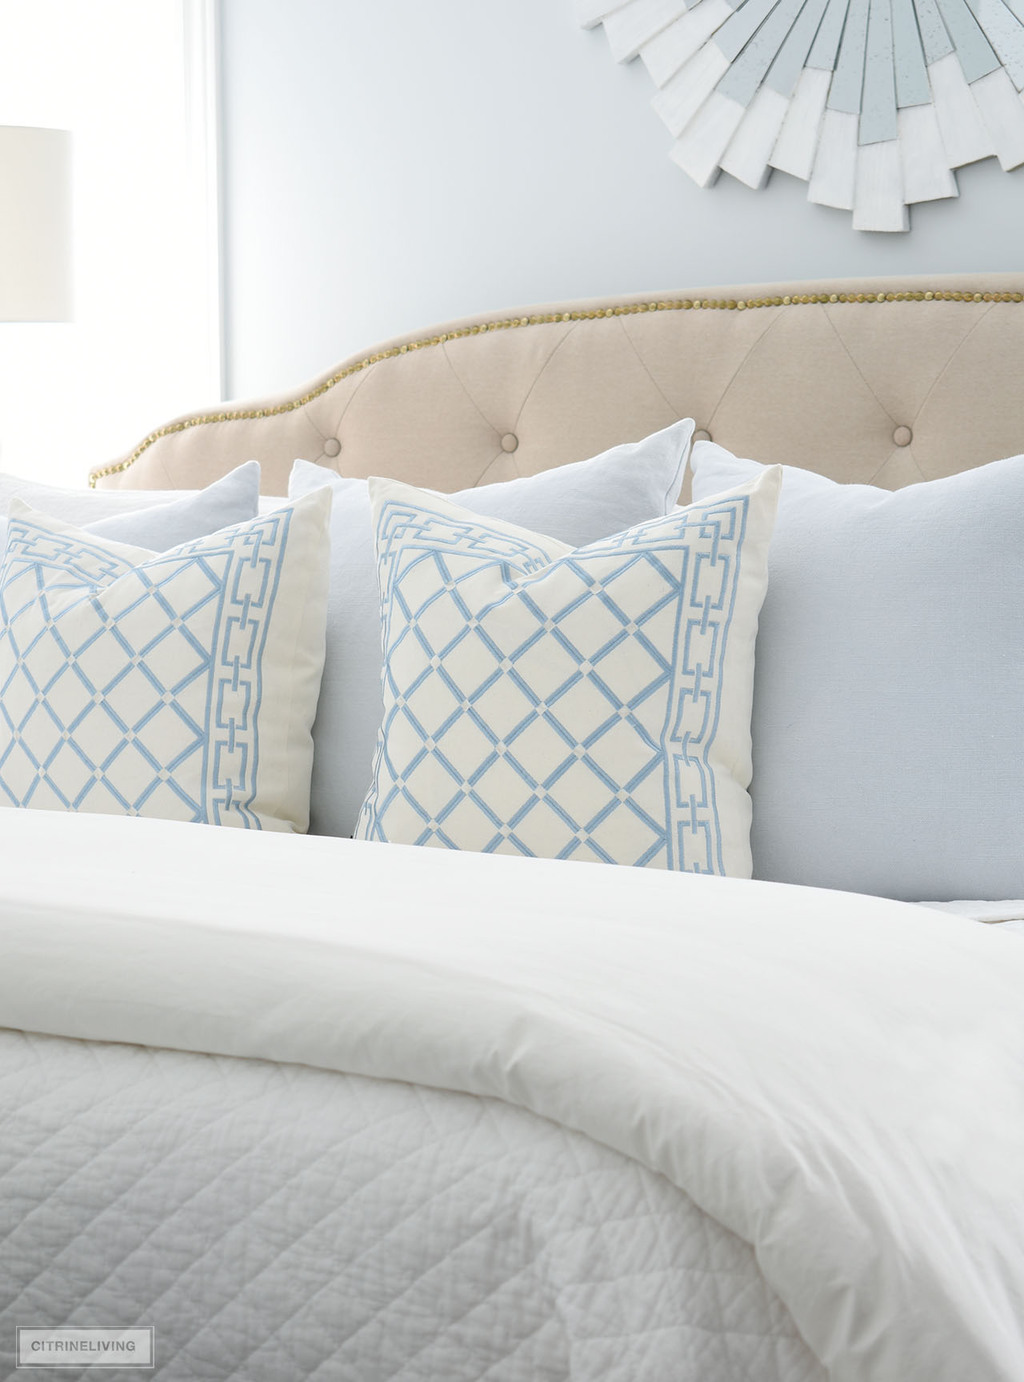 Light blue and white embroidered pillows in a diamond pattern, layered with pretty pale blue pillows styled on an upholstered bed.